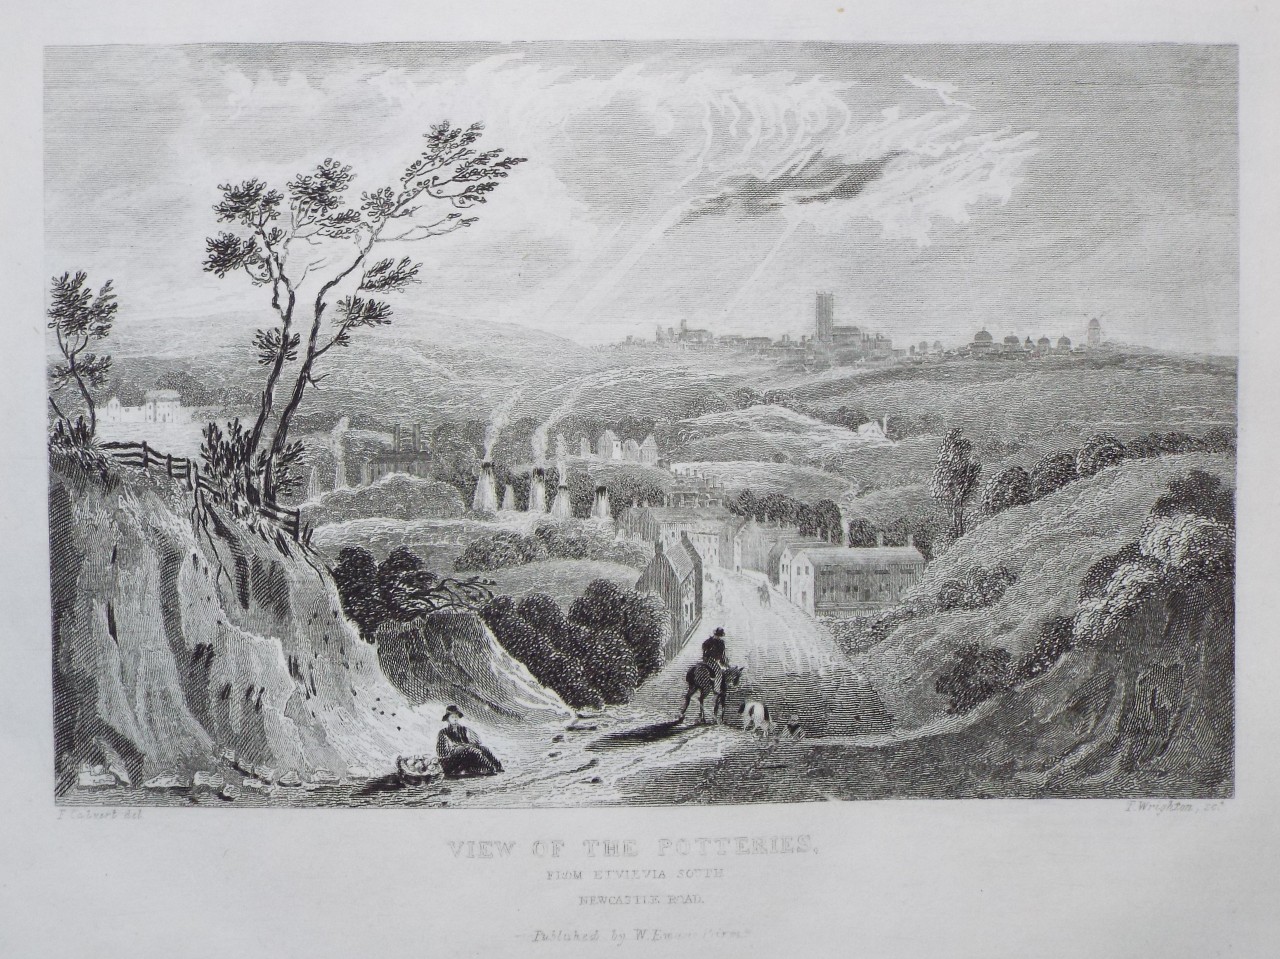 Print - View of the Potteries from Etvievia South Newcastle Road. - Wrighton